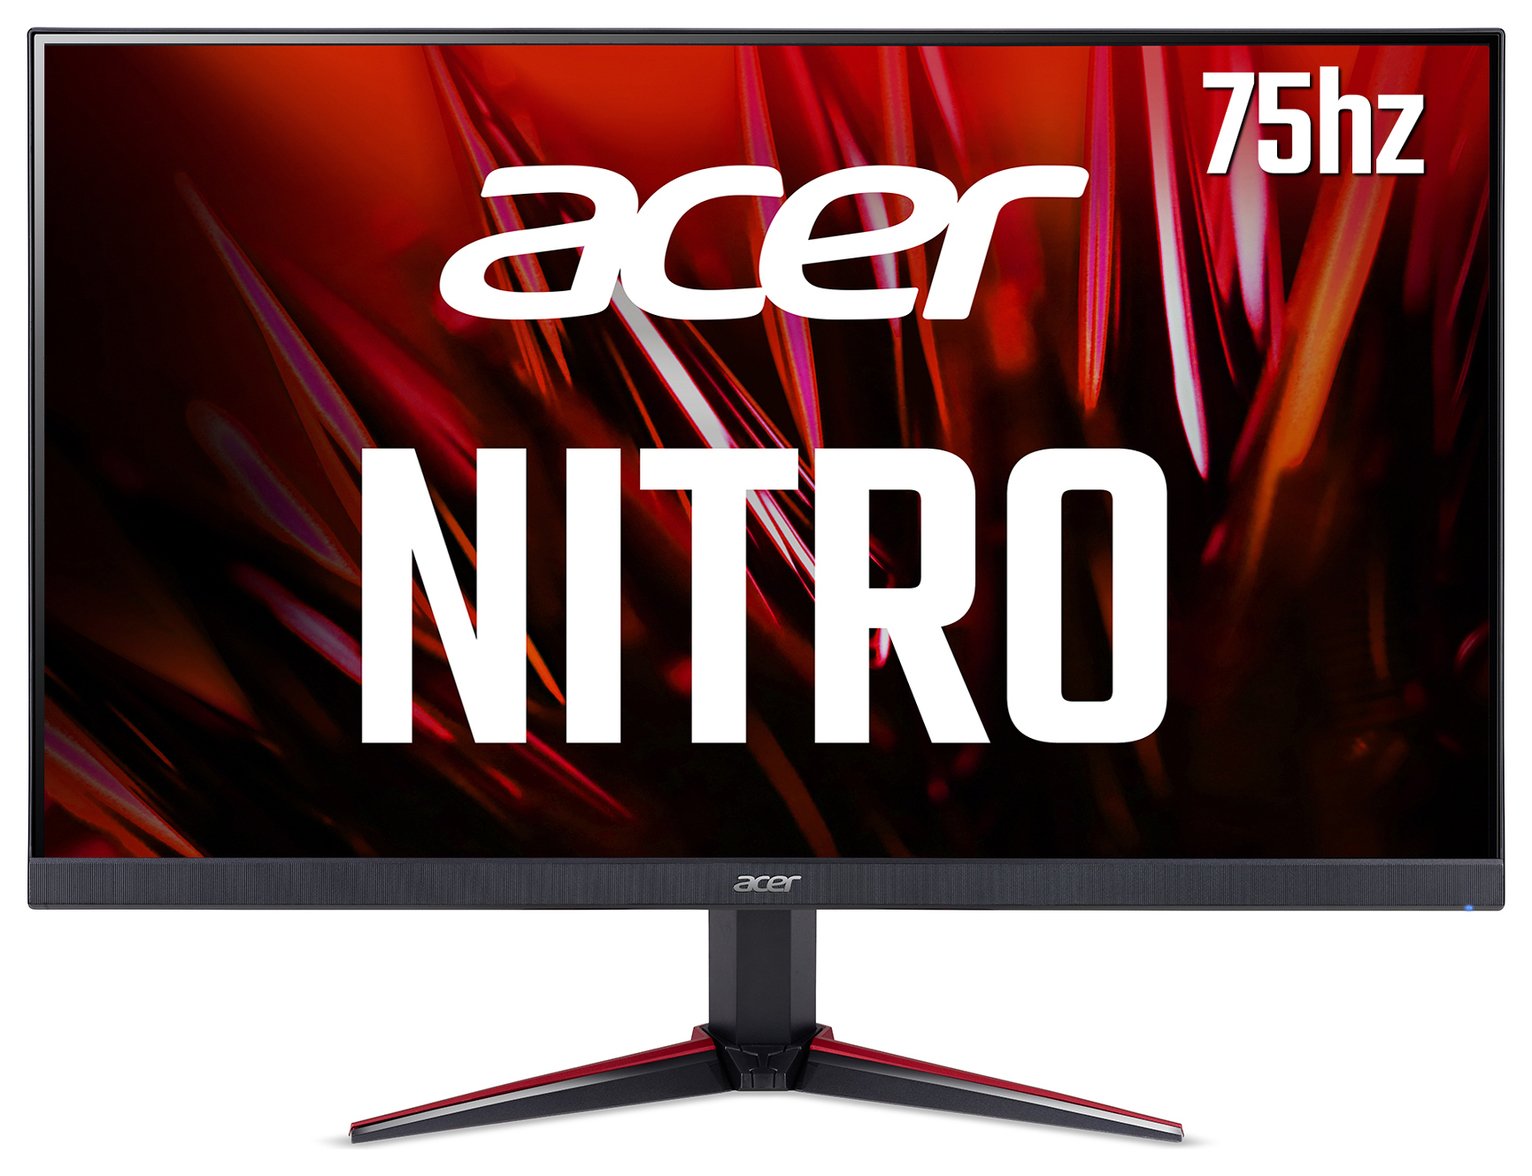 Acer Nitro VG270bmiix 27 Inch FHD 75Hz IPS Gaming Monitor Review